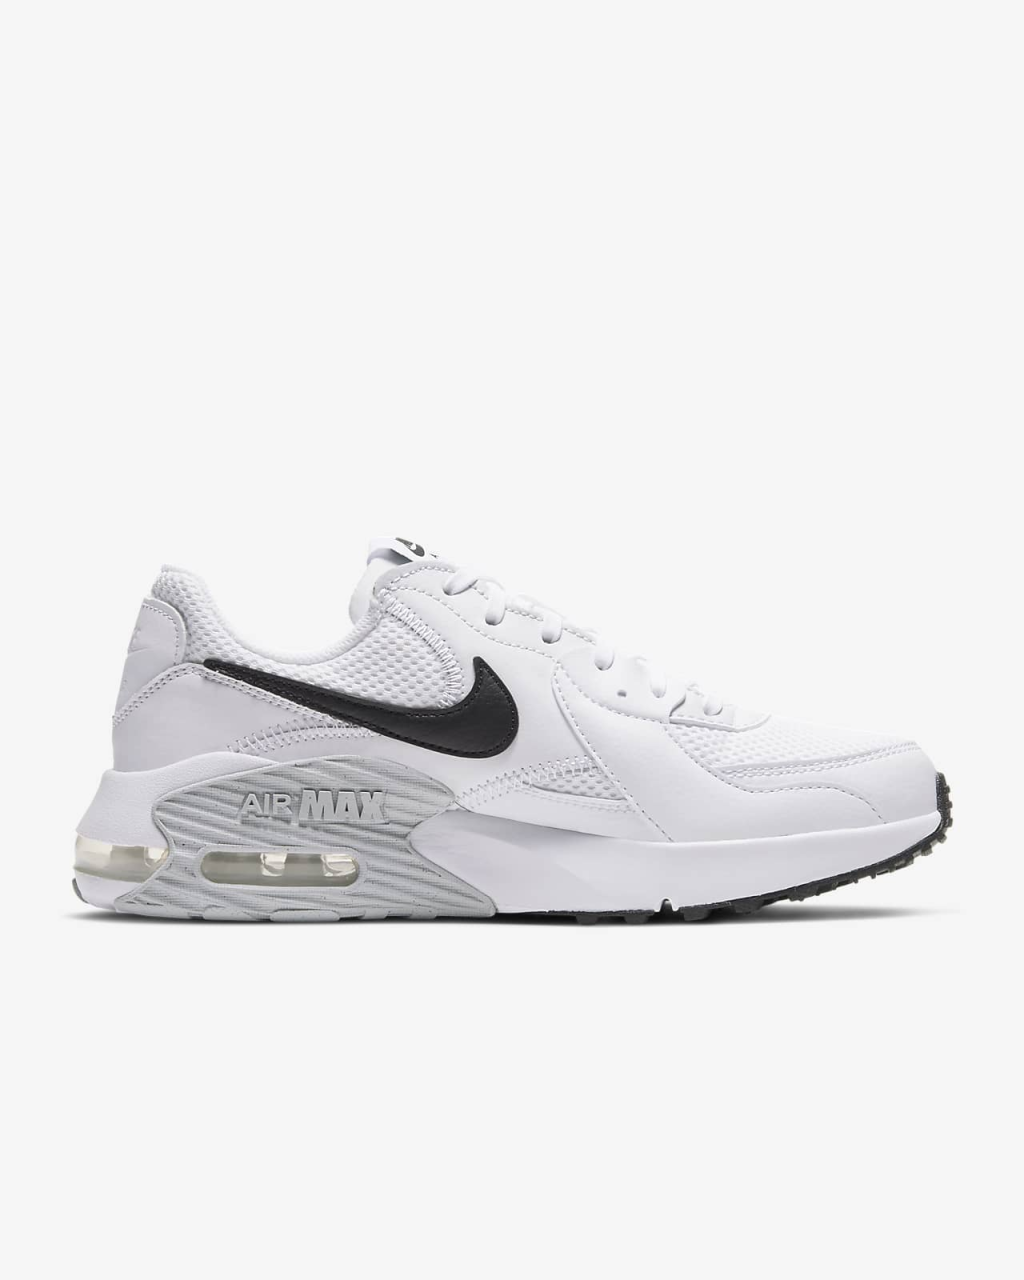 Picture of: Nike Air Max Excee Damenschuh